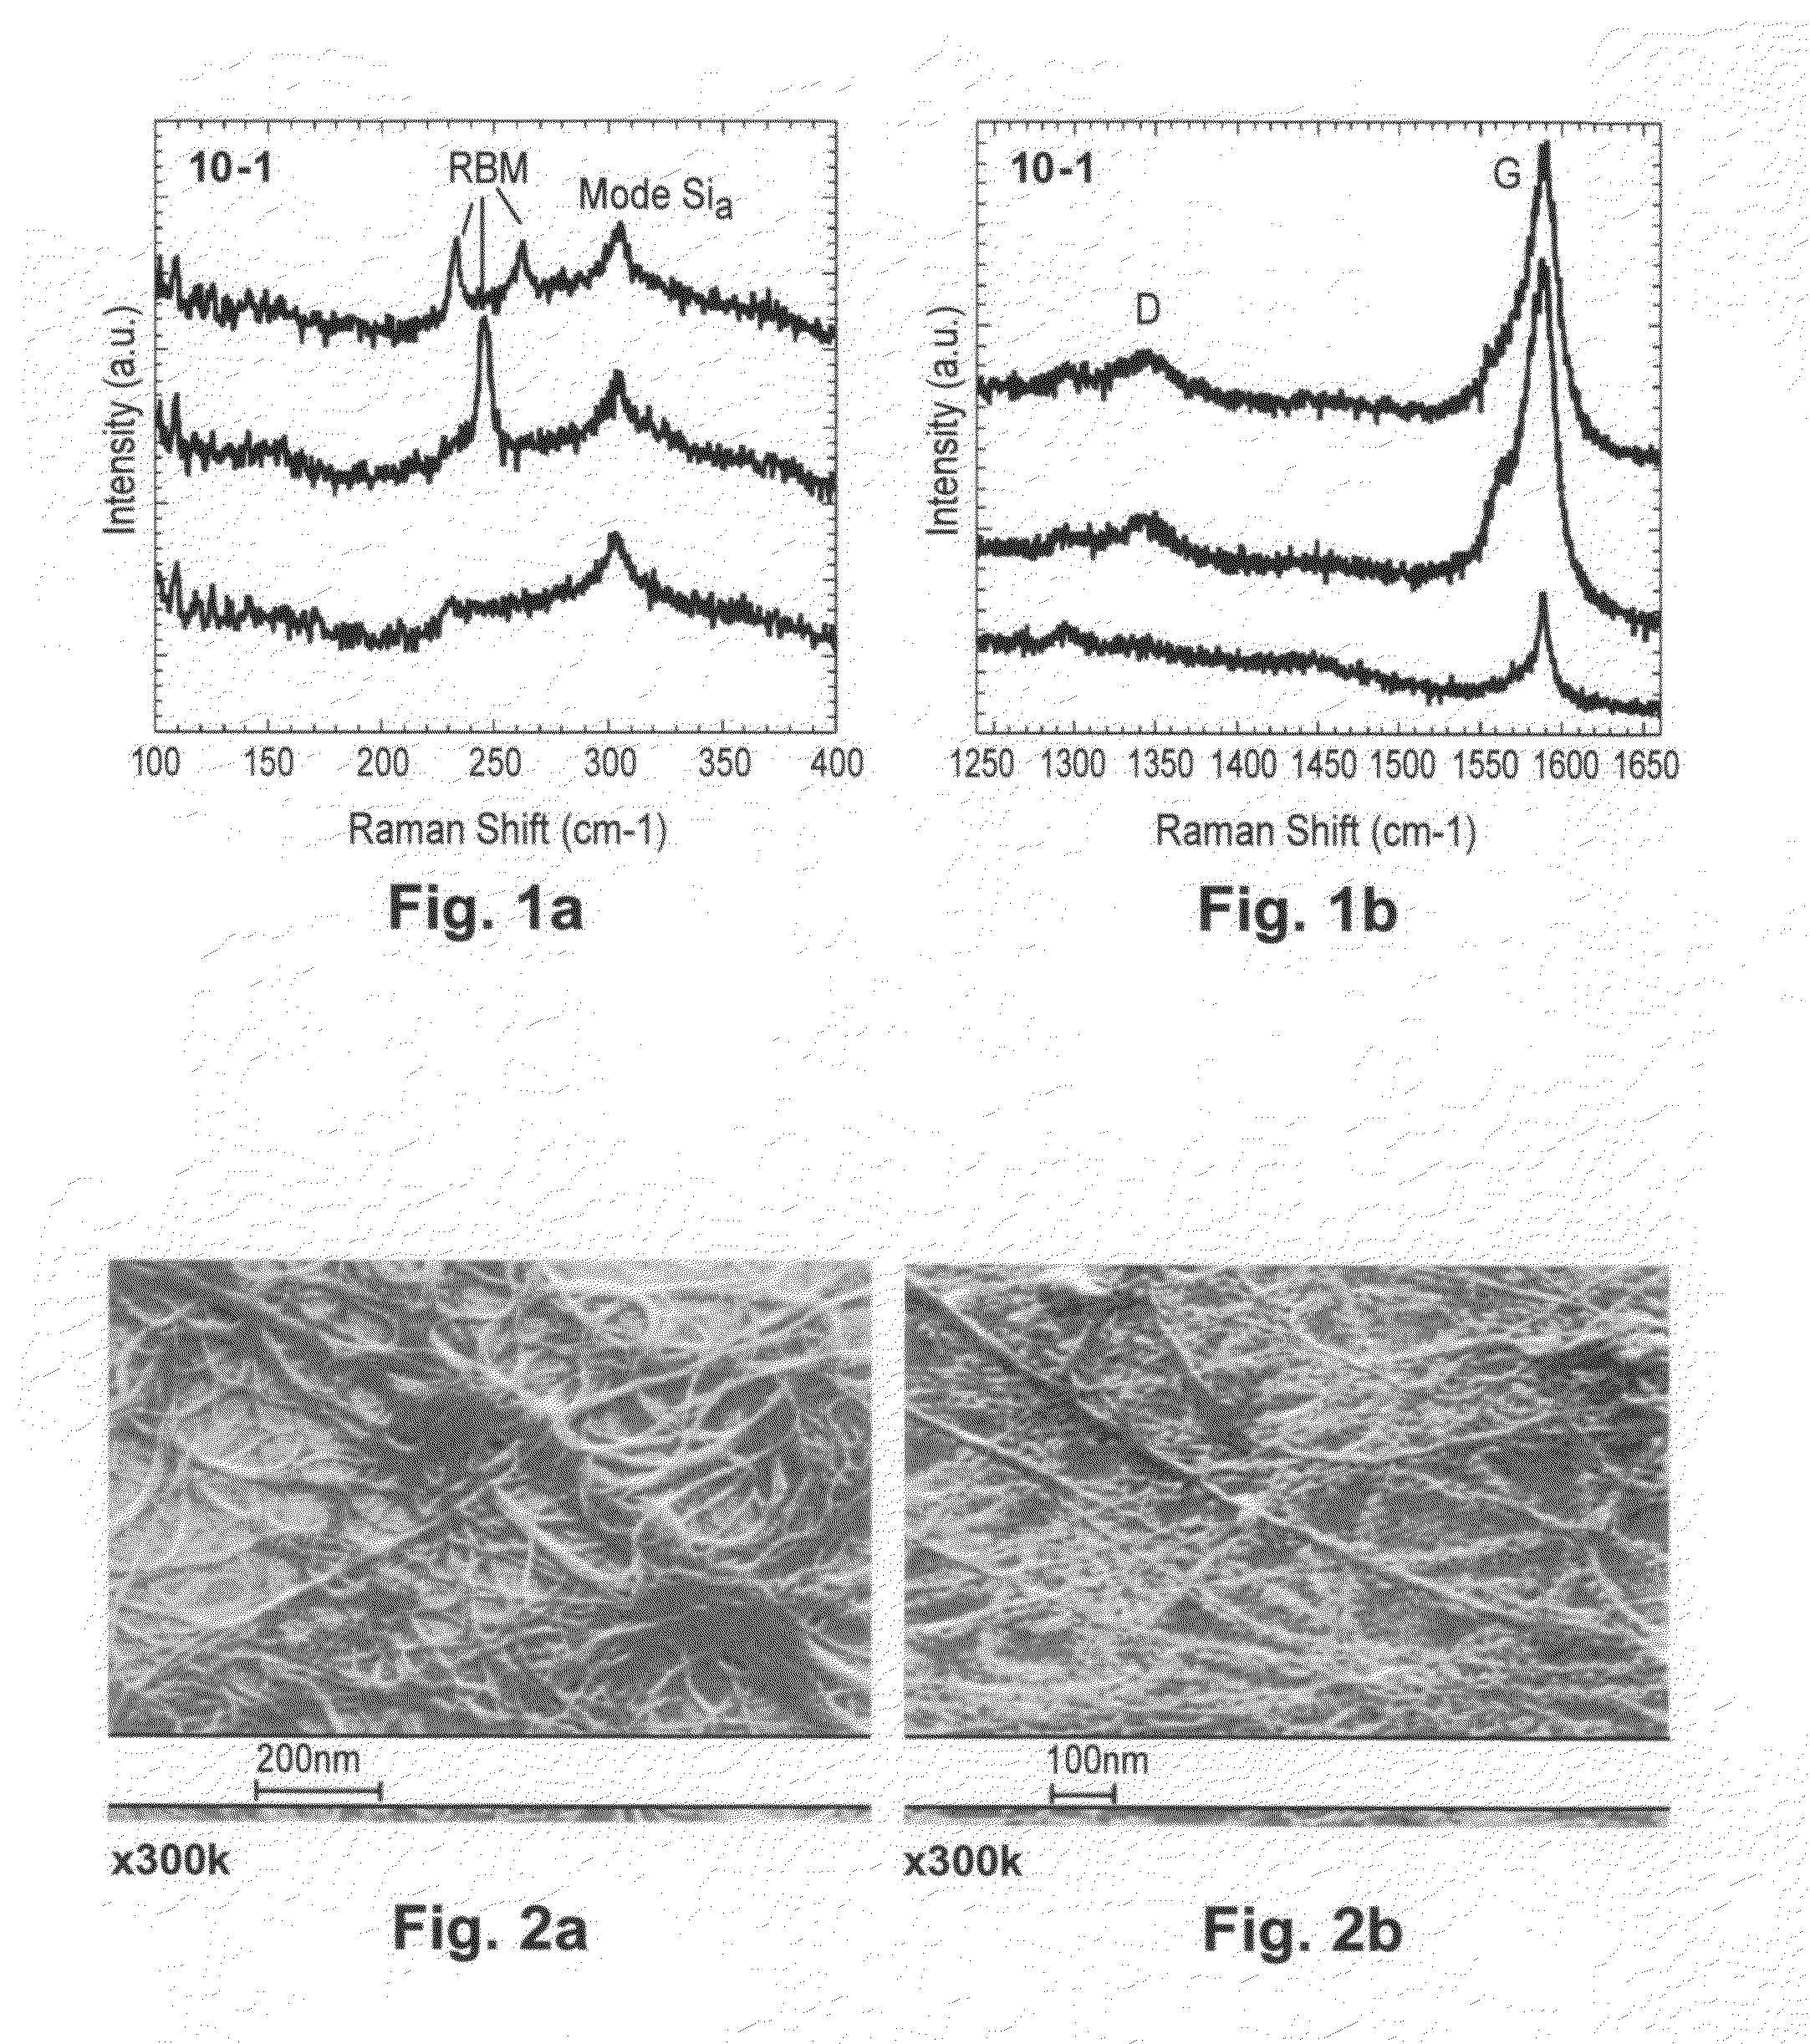 Large-area transparent conductive coatings including doped carbon nanotubes and nanowire composites, and methods of making the same